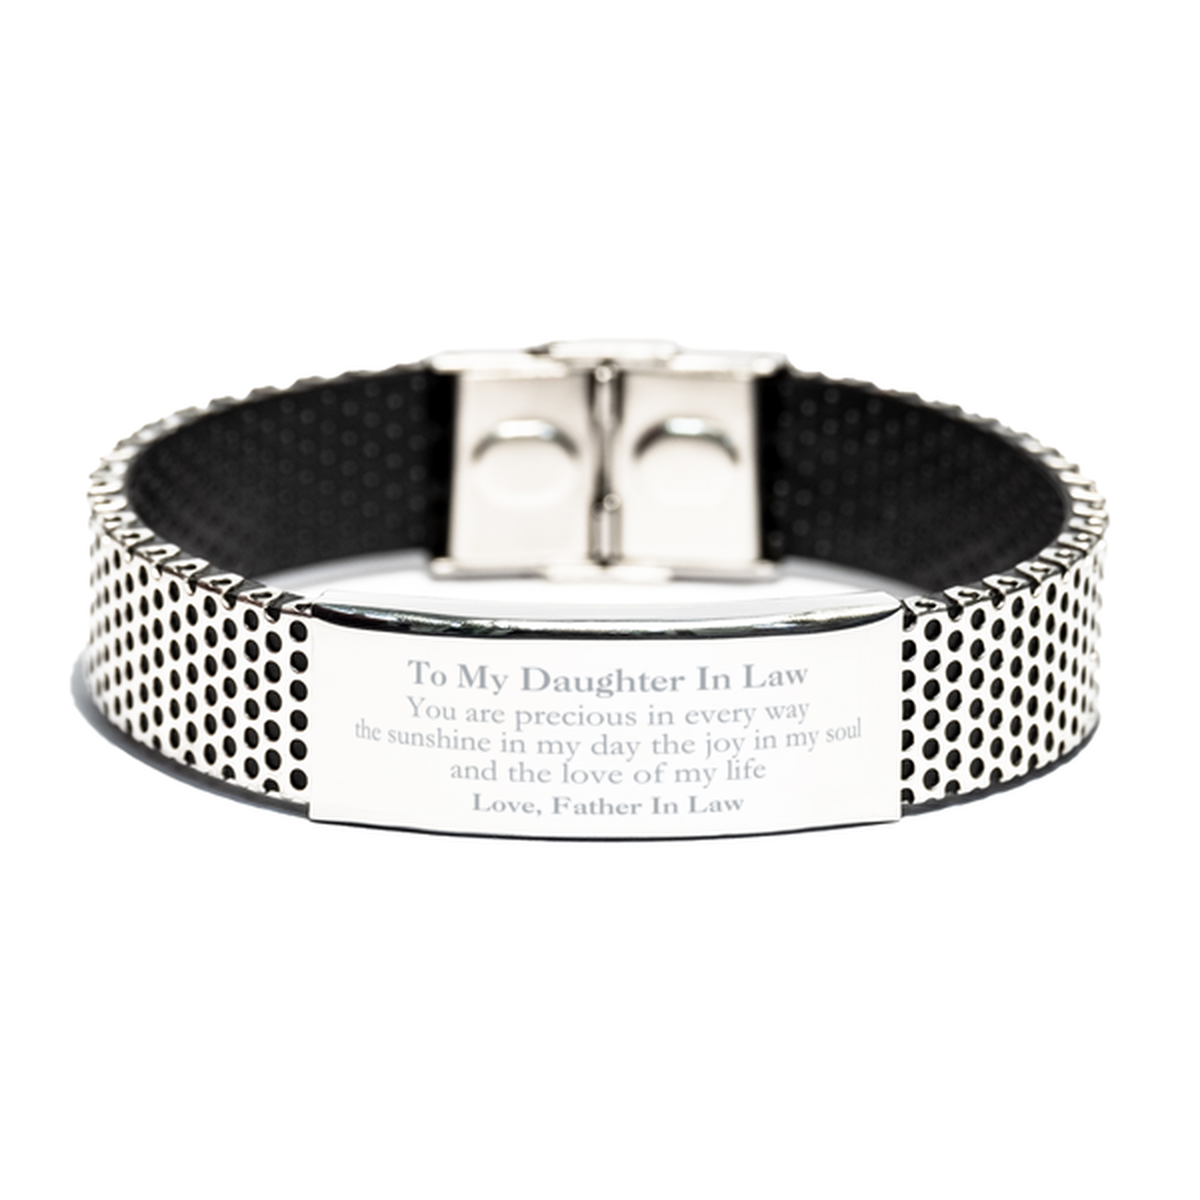 Graduation Gifts for Daughter In Law Stainless Steel Bracelet Present from Father In Law, Christmas Daughter In Law Birthday Gifts Daughter In Law You are precious in every way the sunshine in my day. Love, Father In Law